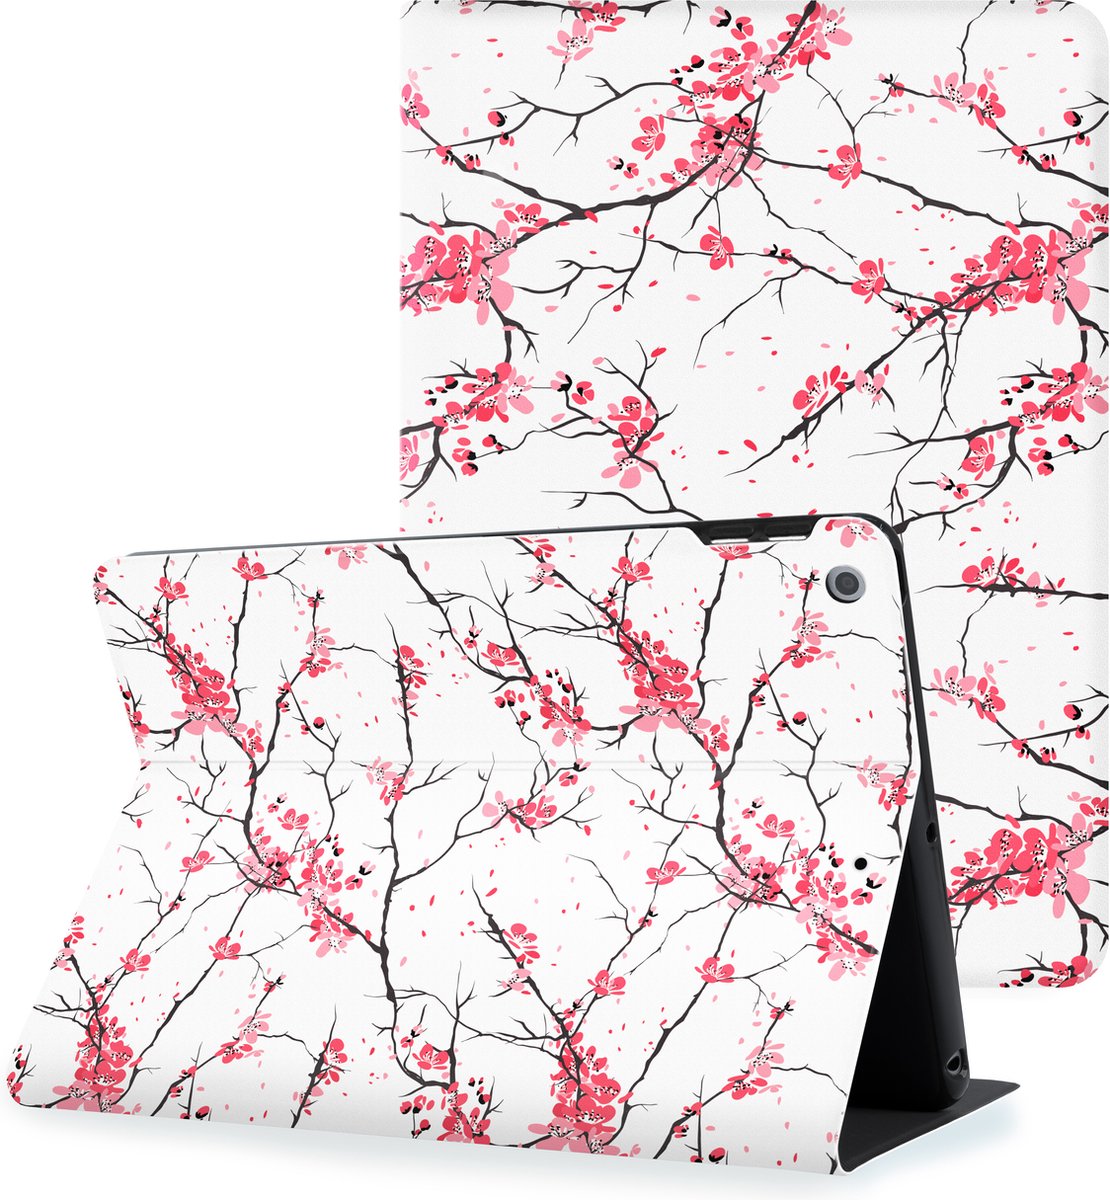 iPad 2021 / 2020 / 2019 hoes - iPad 10.2 inch hoes - Smart Book Case - Cherry Blossom